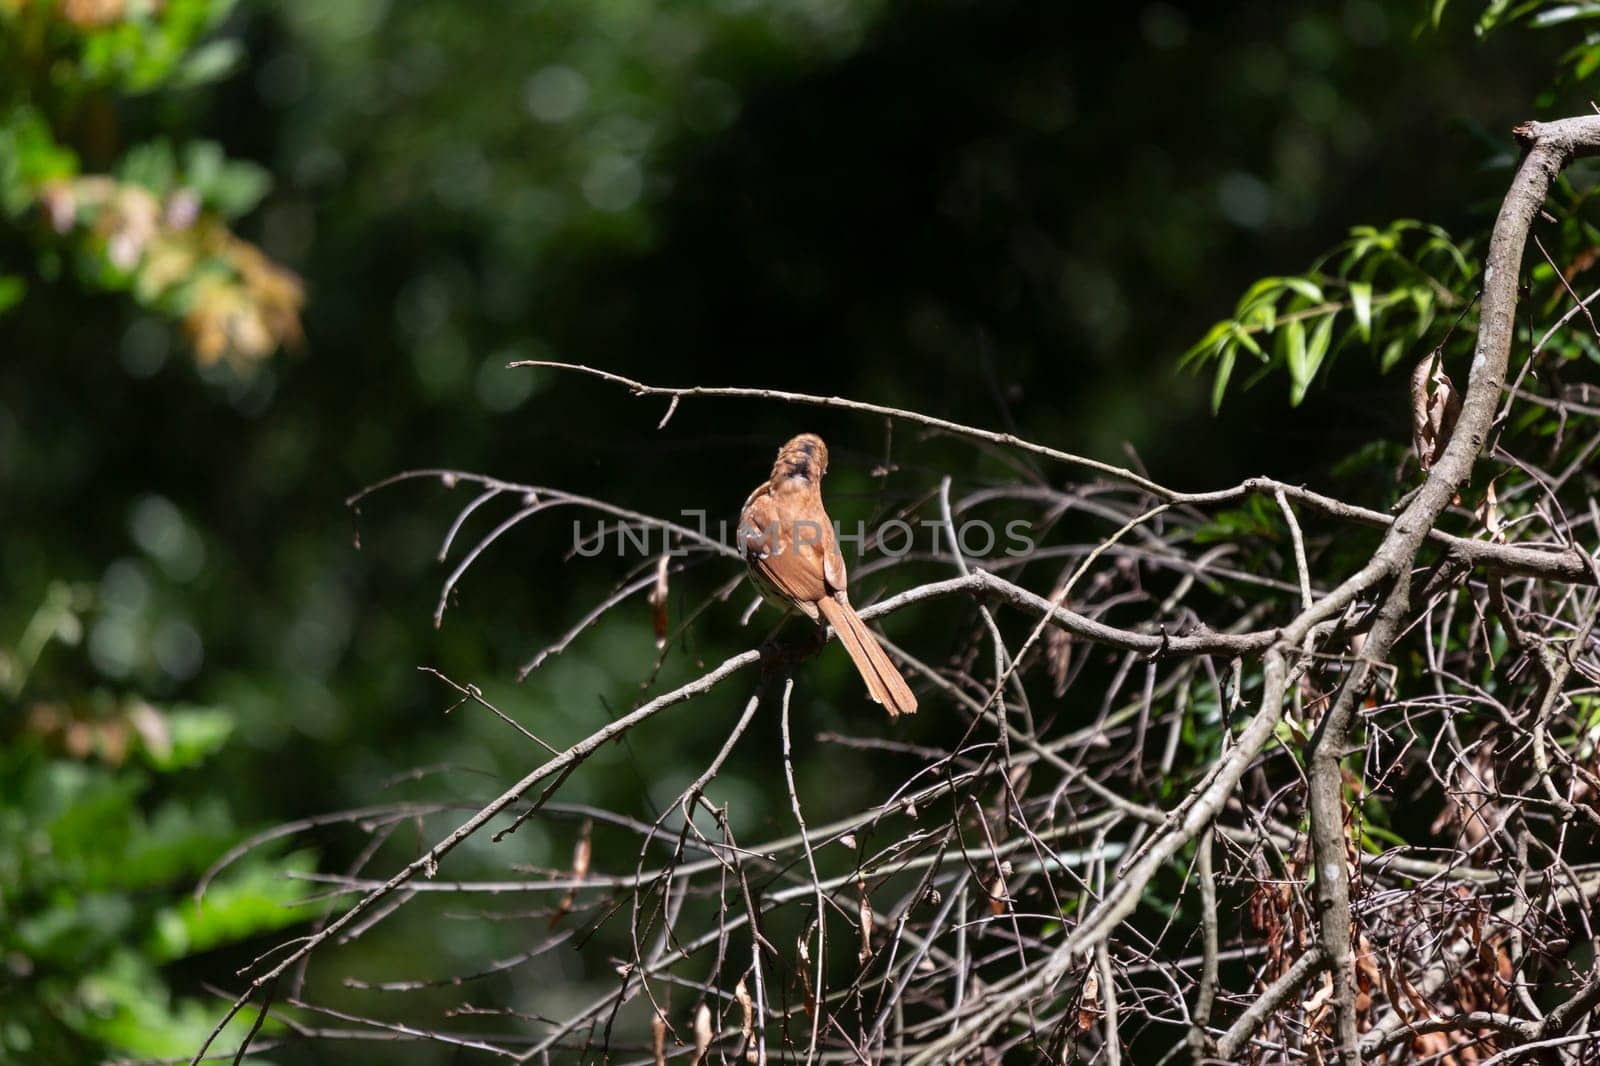 Brown thrasher (Toxostoma rufum) who is beginning to molt looking around